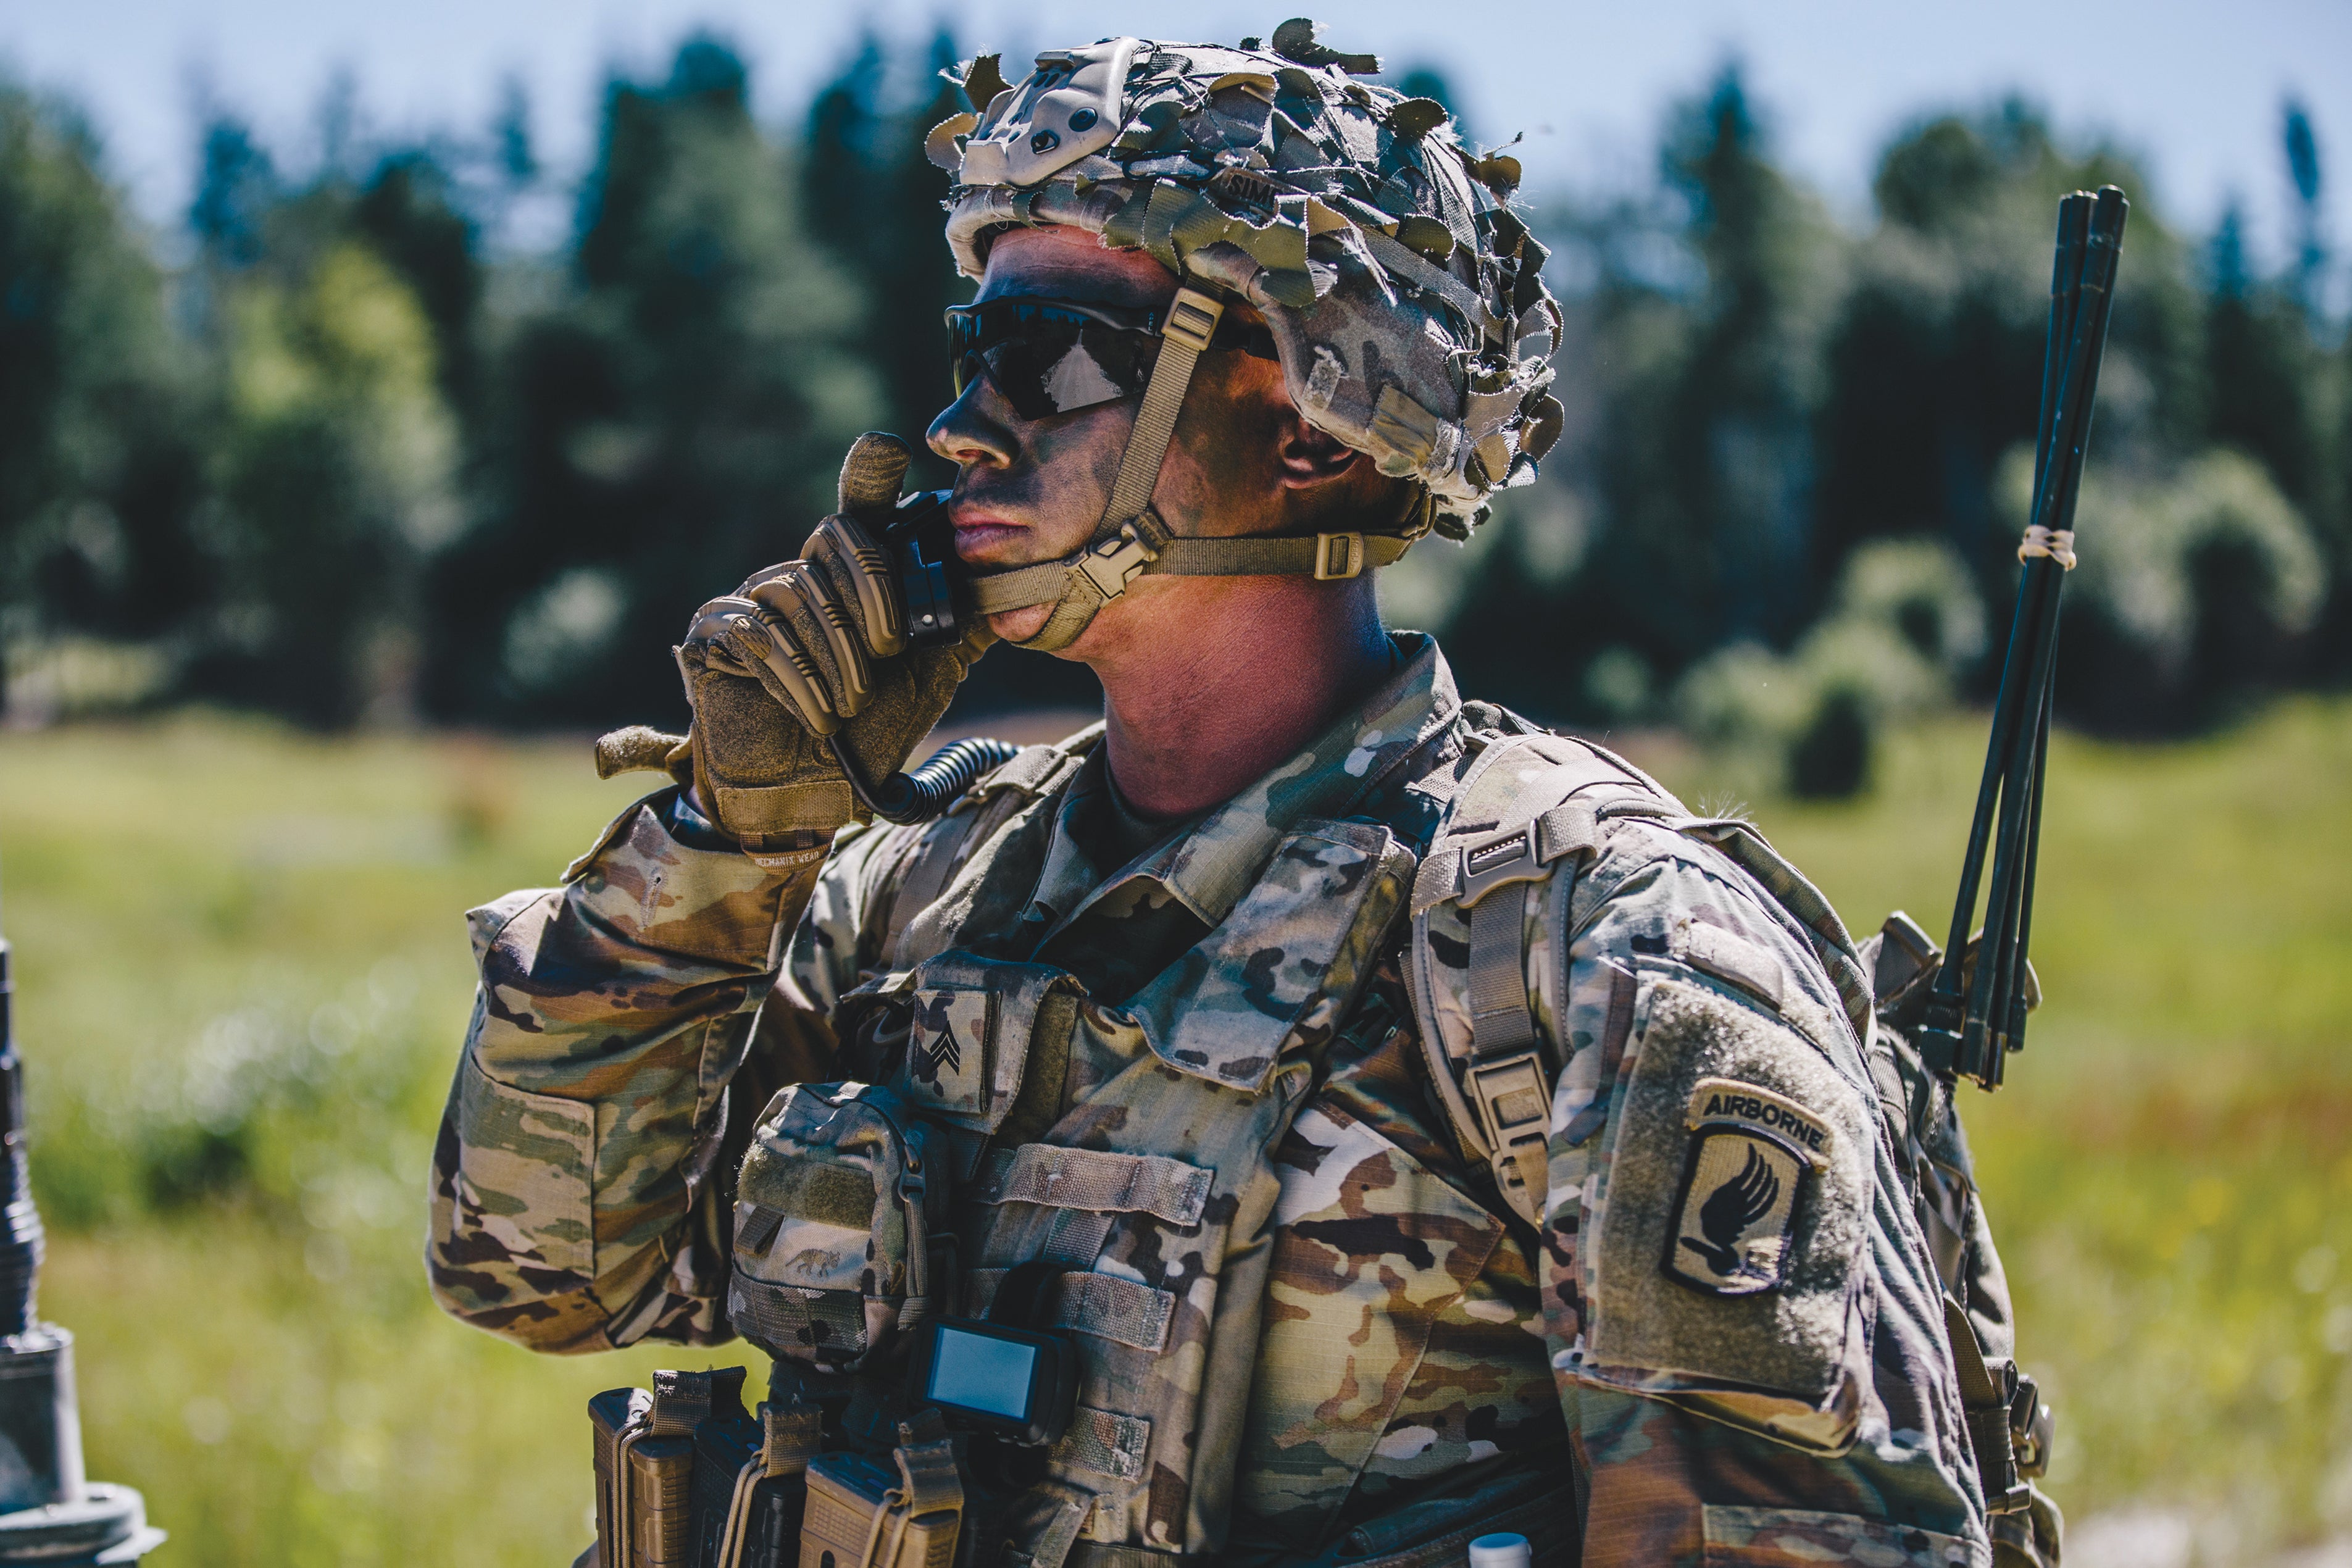 A paratrooper with the 173rd Airborne Brigade coordinates firing positions during an exercise at Grafenwoehr Training Area, Germany. (Credit: U.S. Army/Spc. Ryan Lucas)